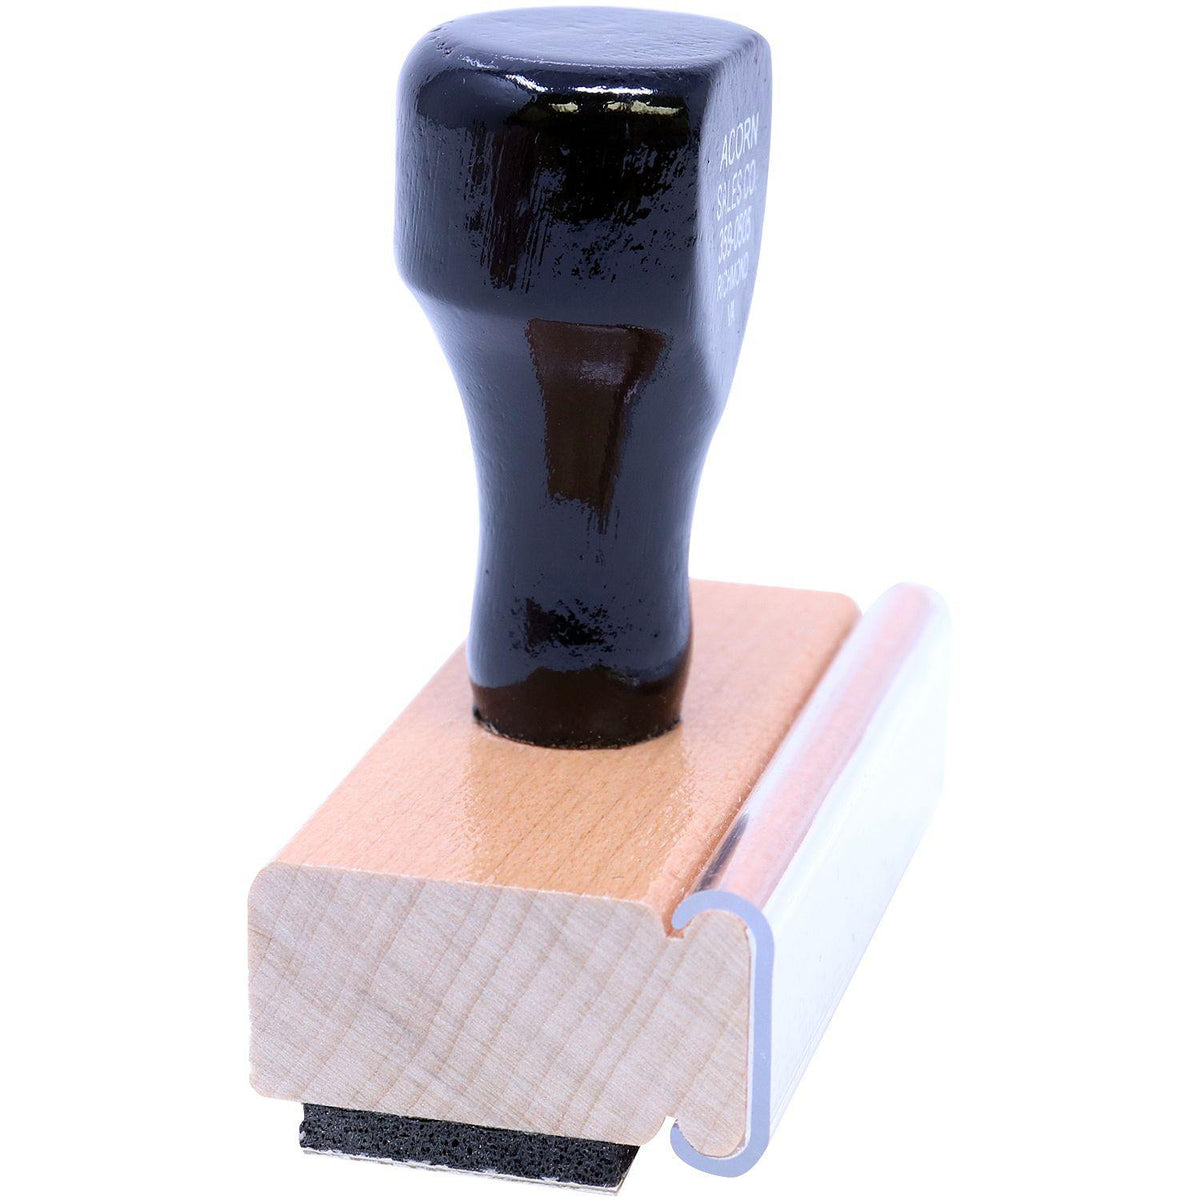 Side View of Large Economy Mail Rubber Stamp at an Angle